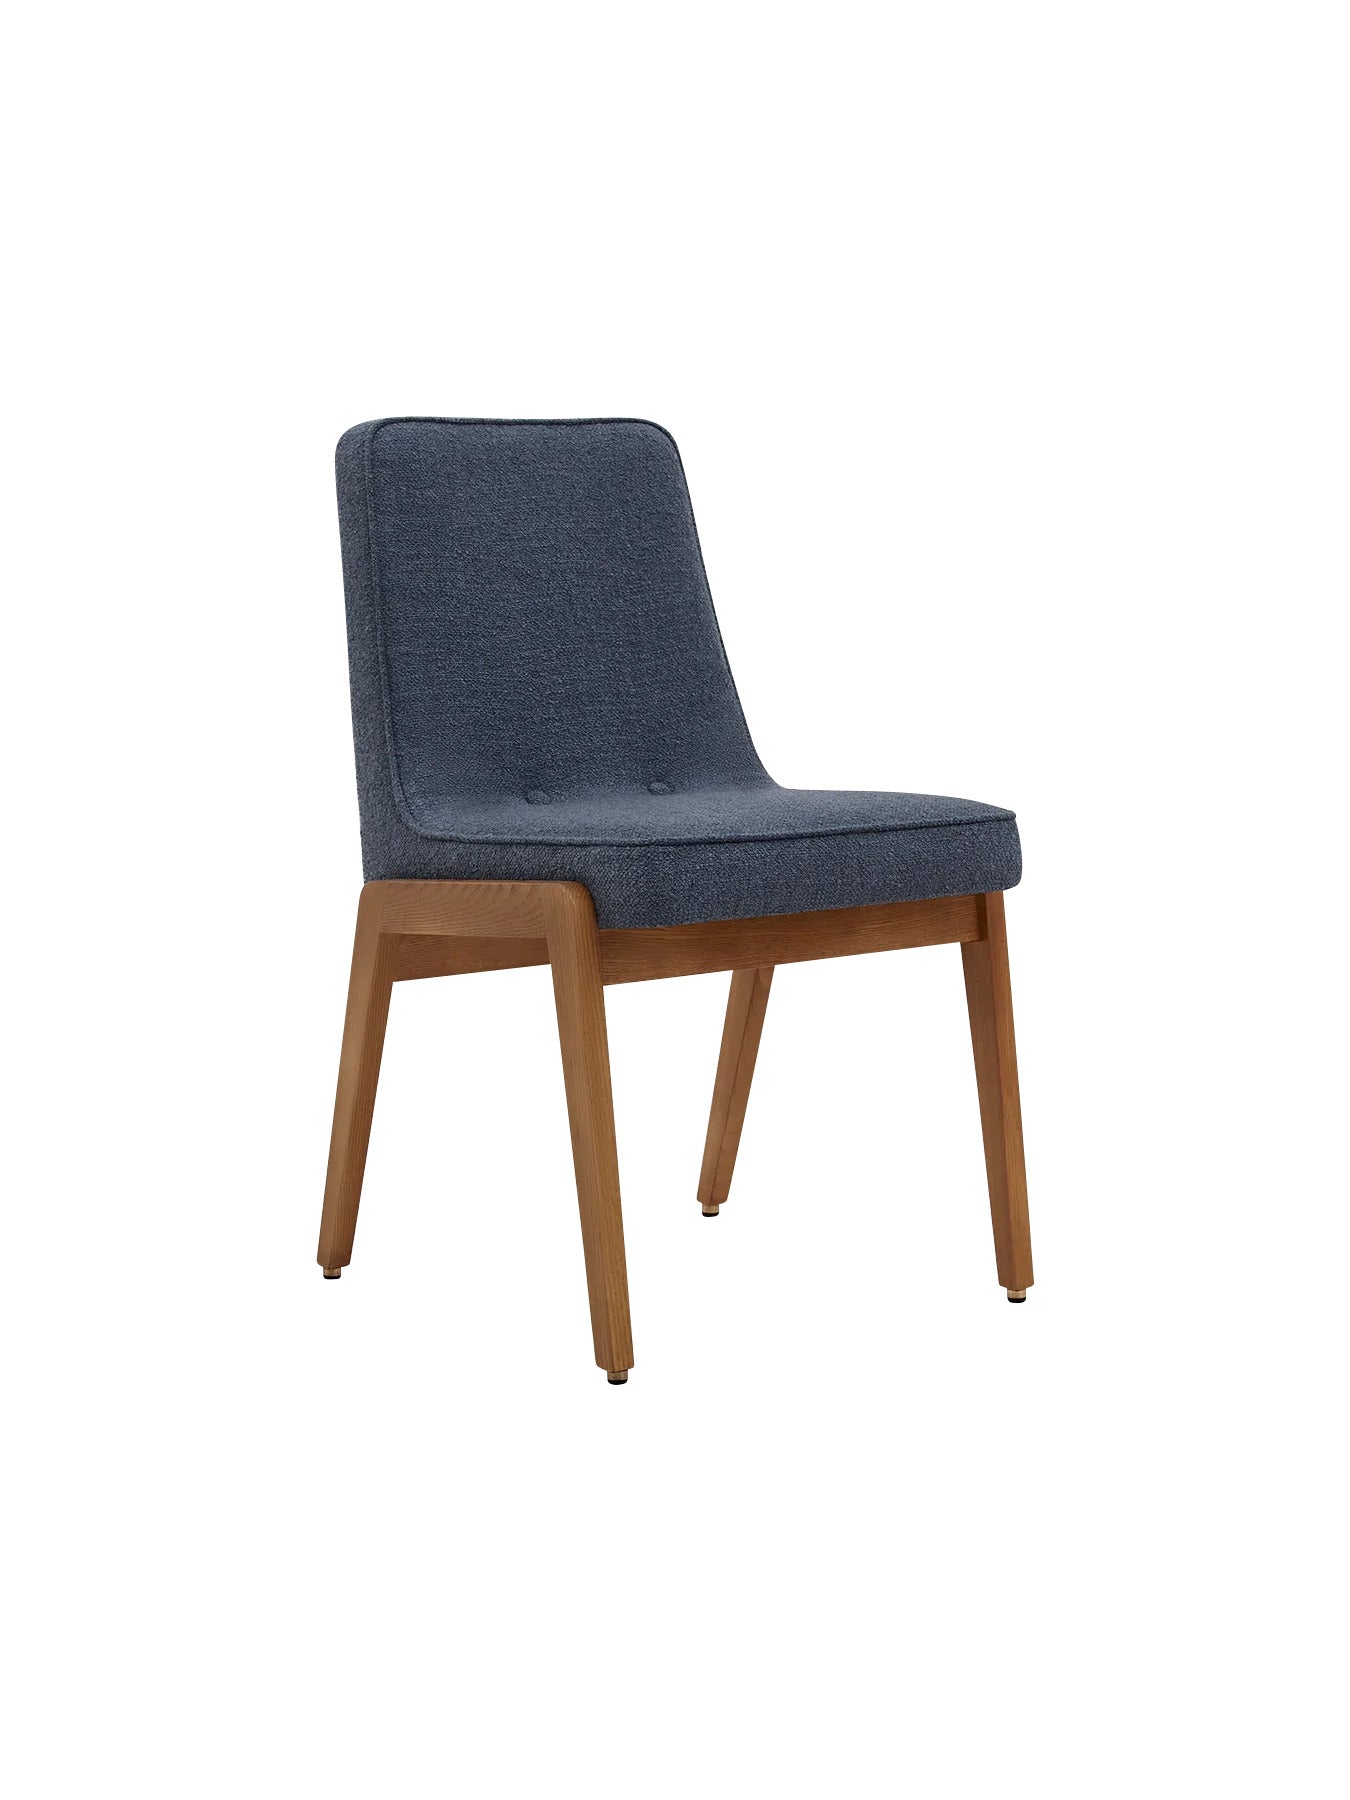 200-125 VAR Side Chair-366 Concept-Contract Furniture Store